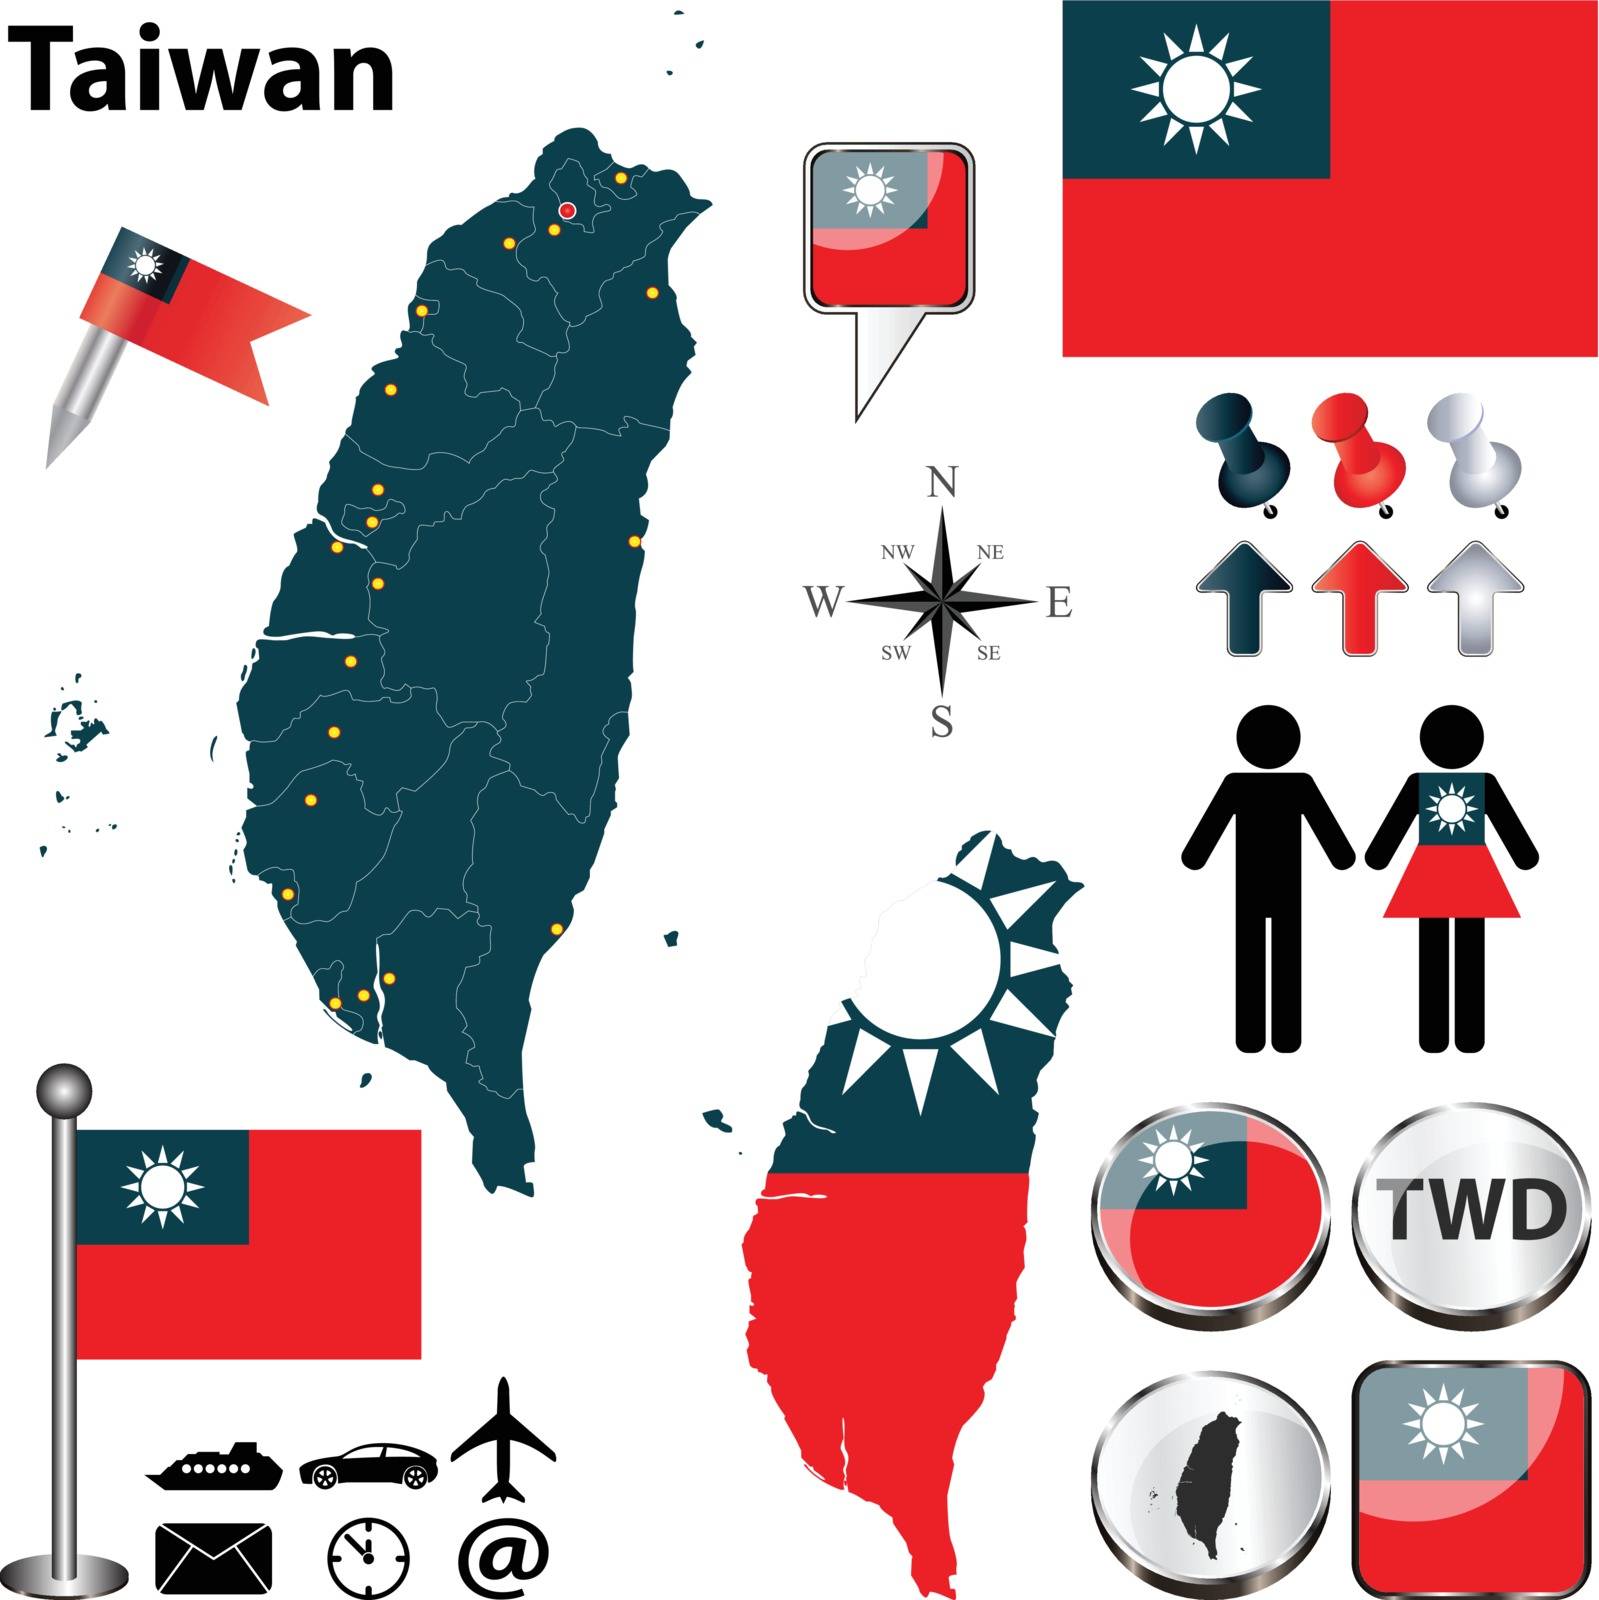 Vector of Taiwan set with detailed country shape with region borders, flags and icons